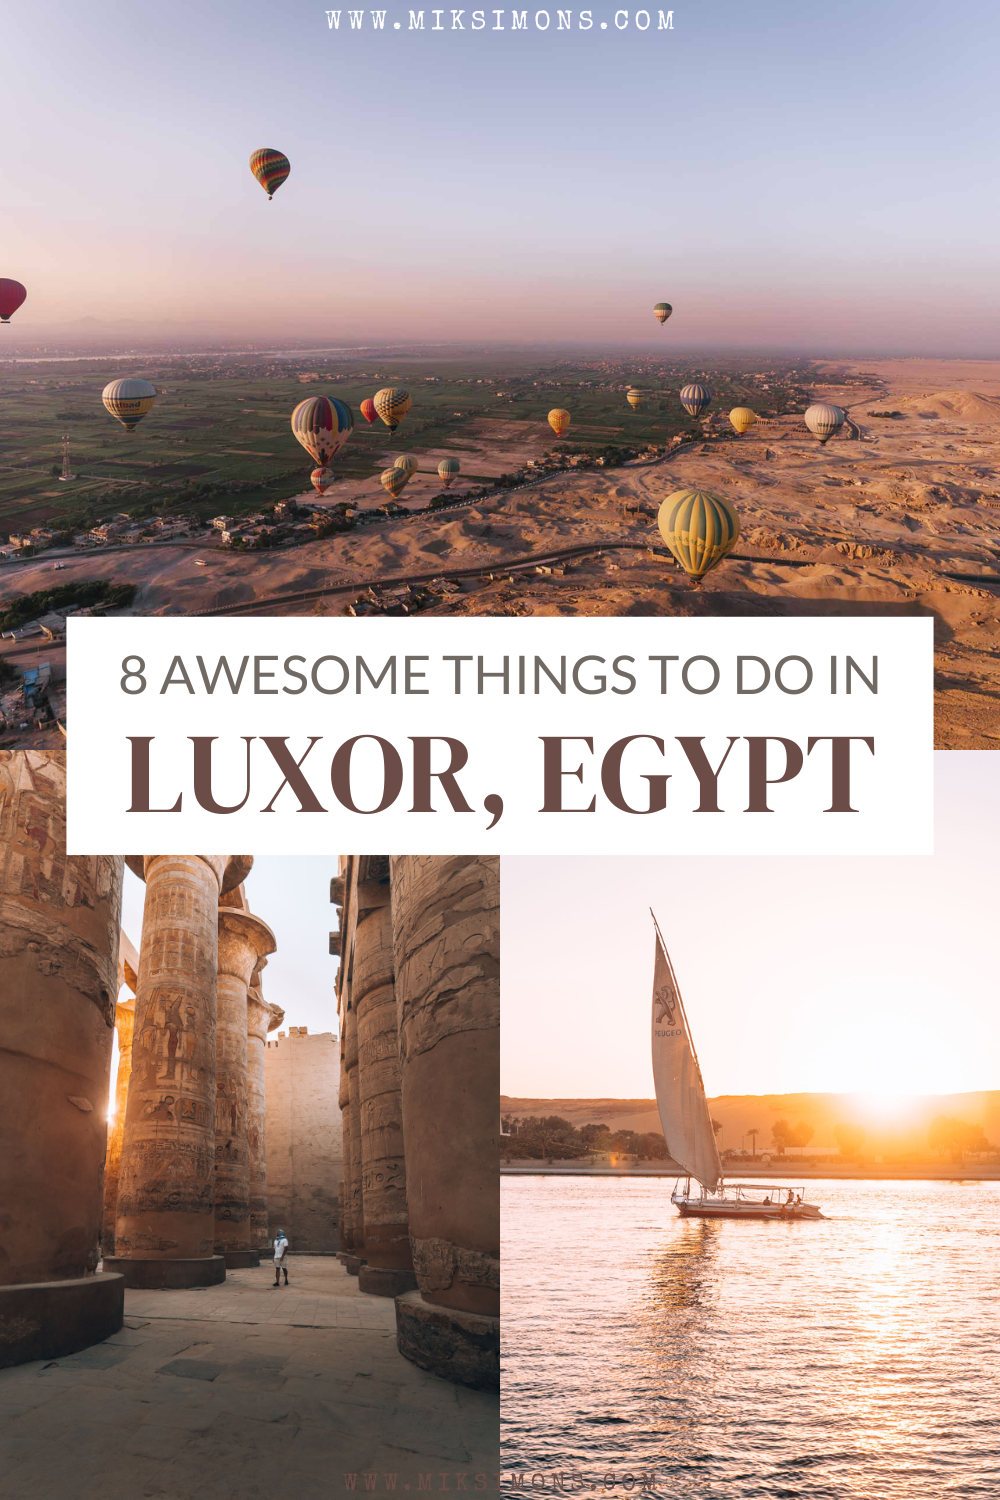 8 things to do in Luxor Egypt